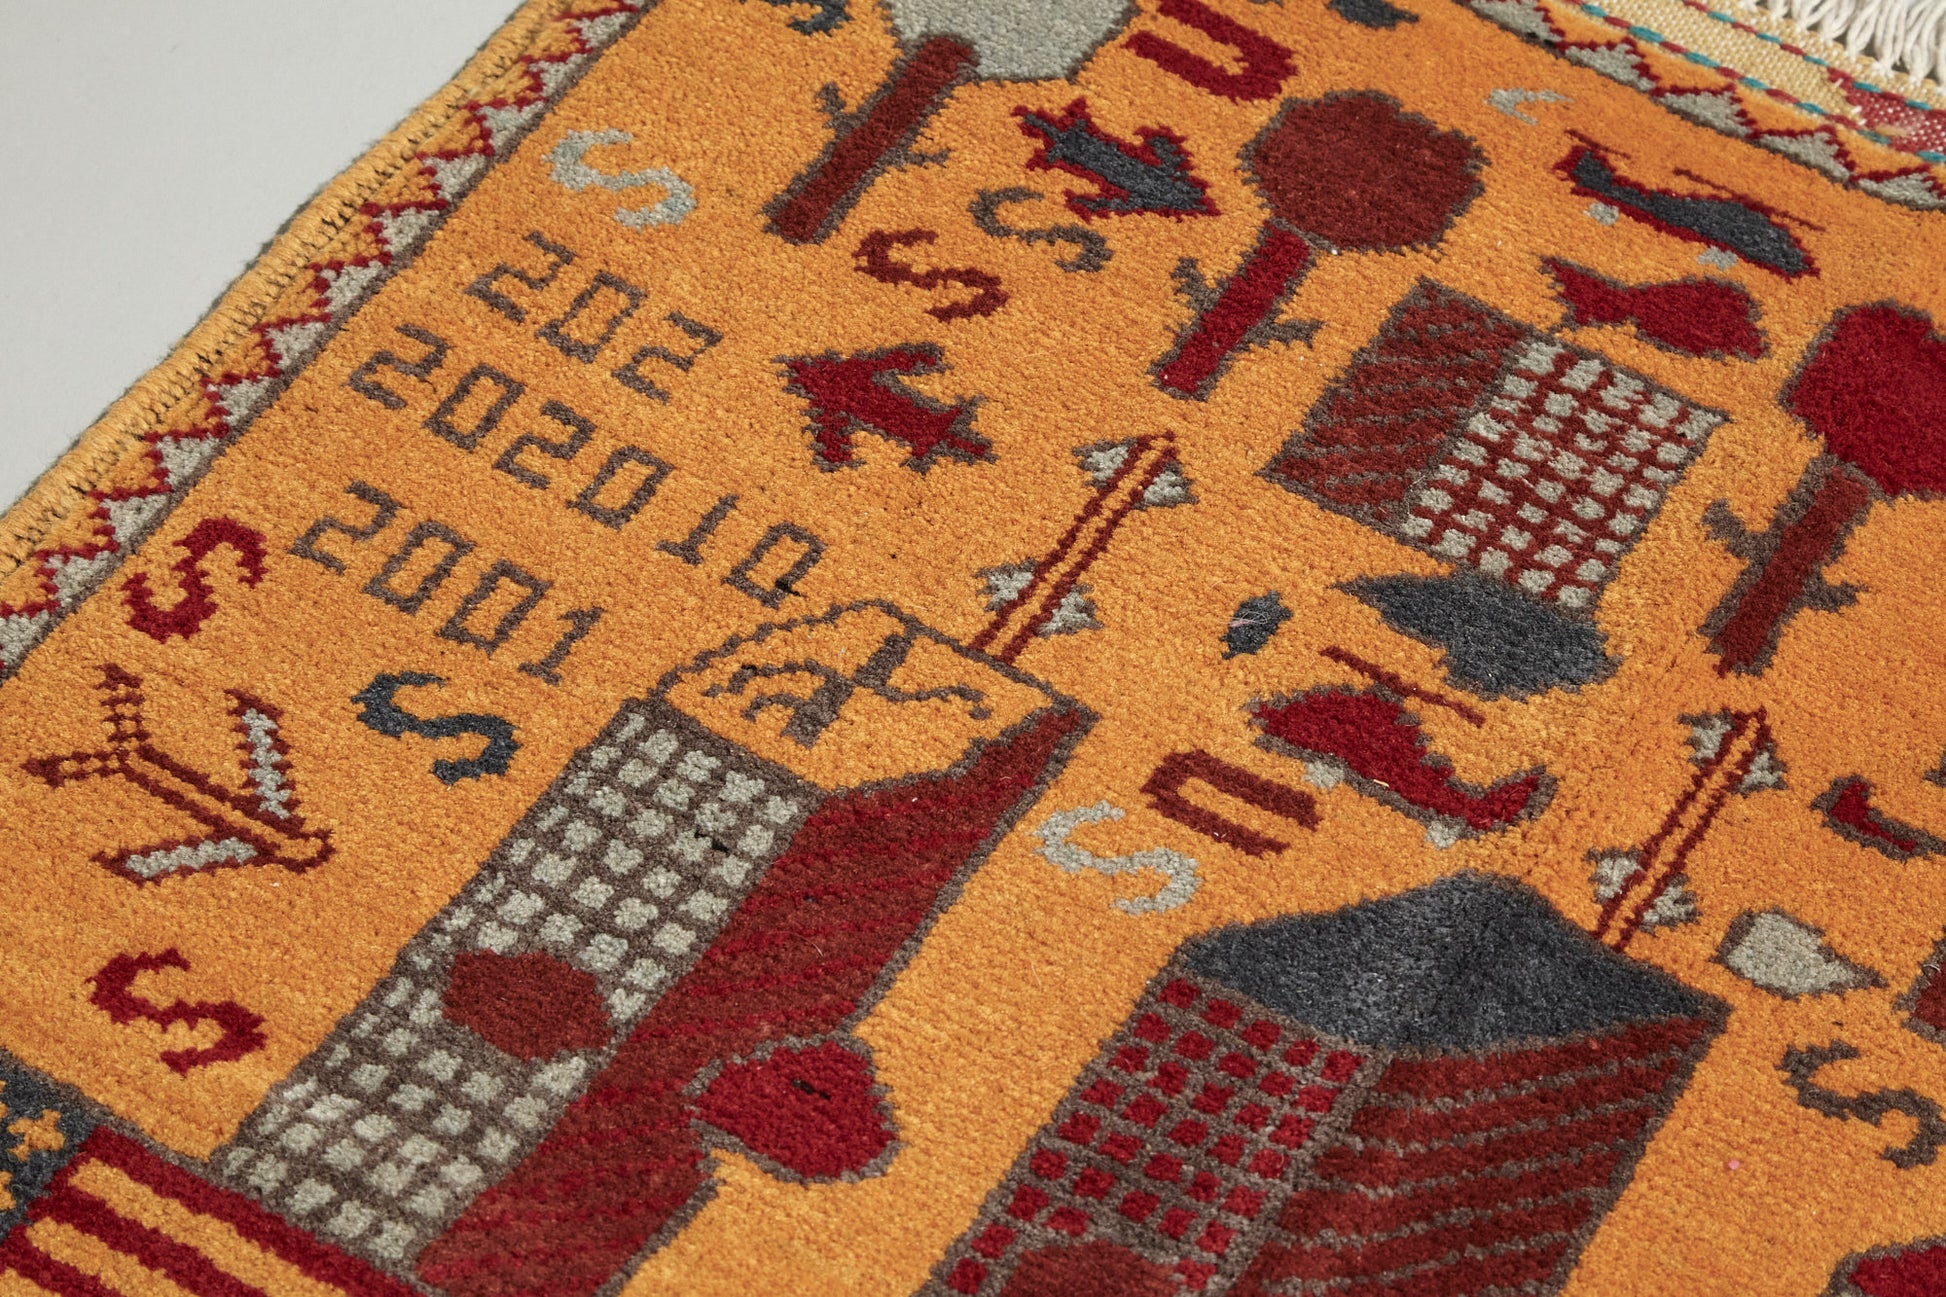 Afghan War Rug - Handwoven with images of twin towers, planes, helicopters available from King Kennedy Rugs Los Angeles